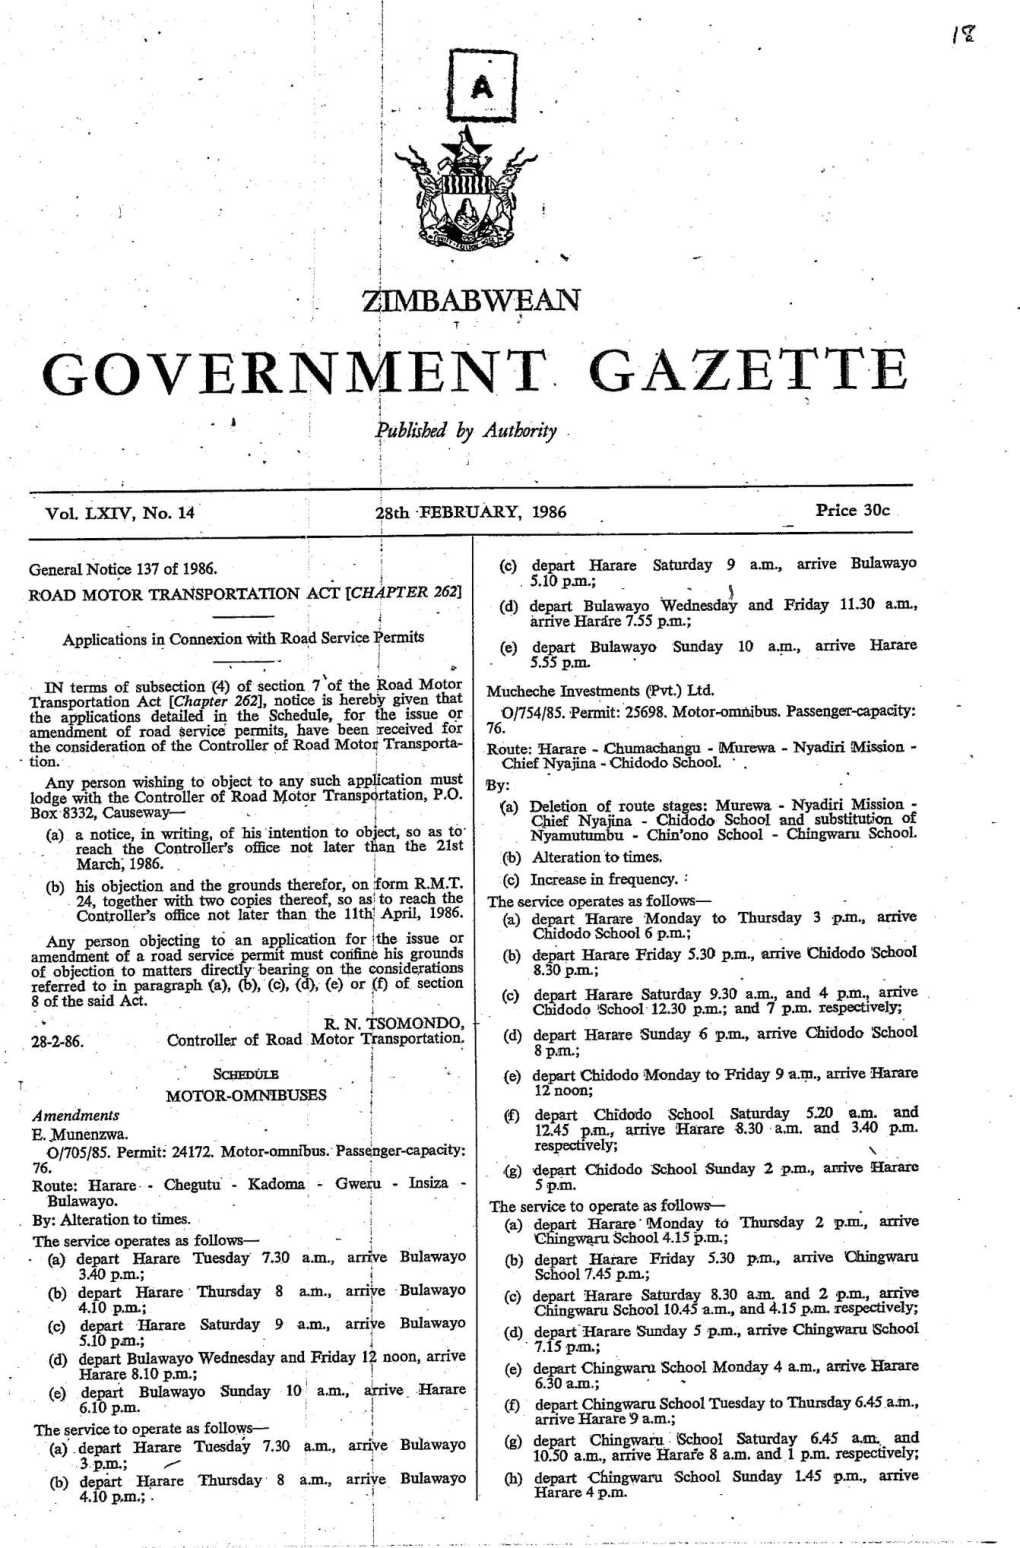 ZIMBABWEAN GOVERNMENTGAZETTE Published by Authority